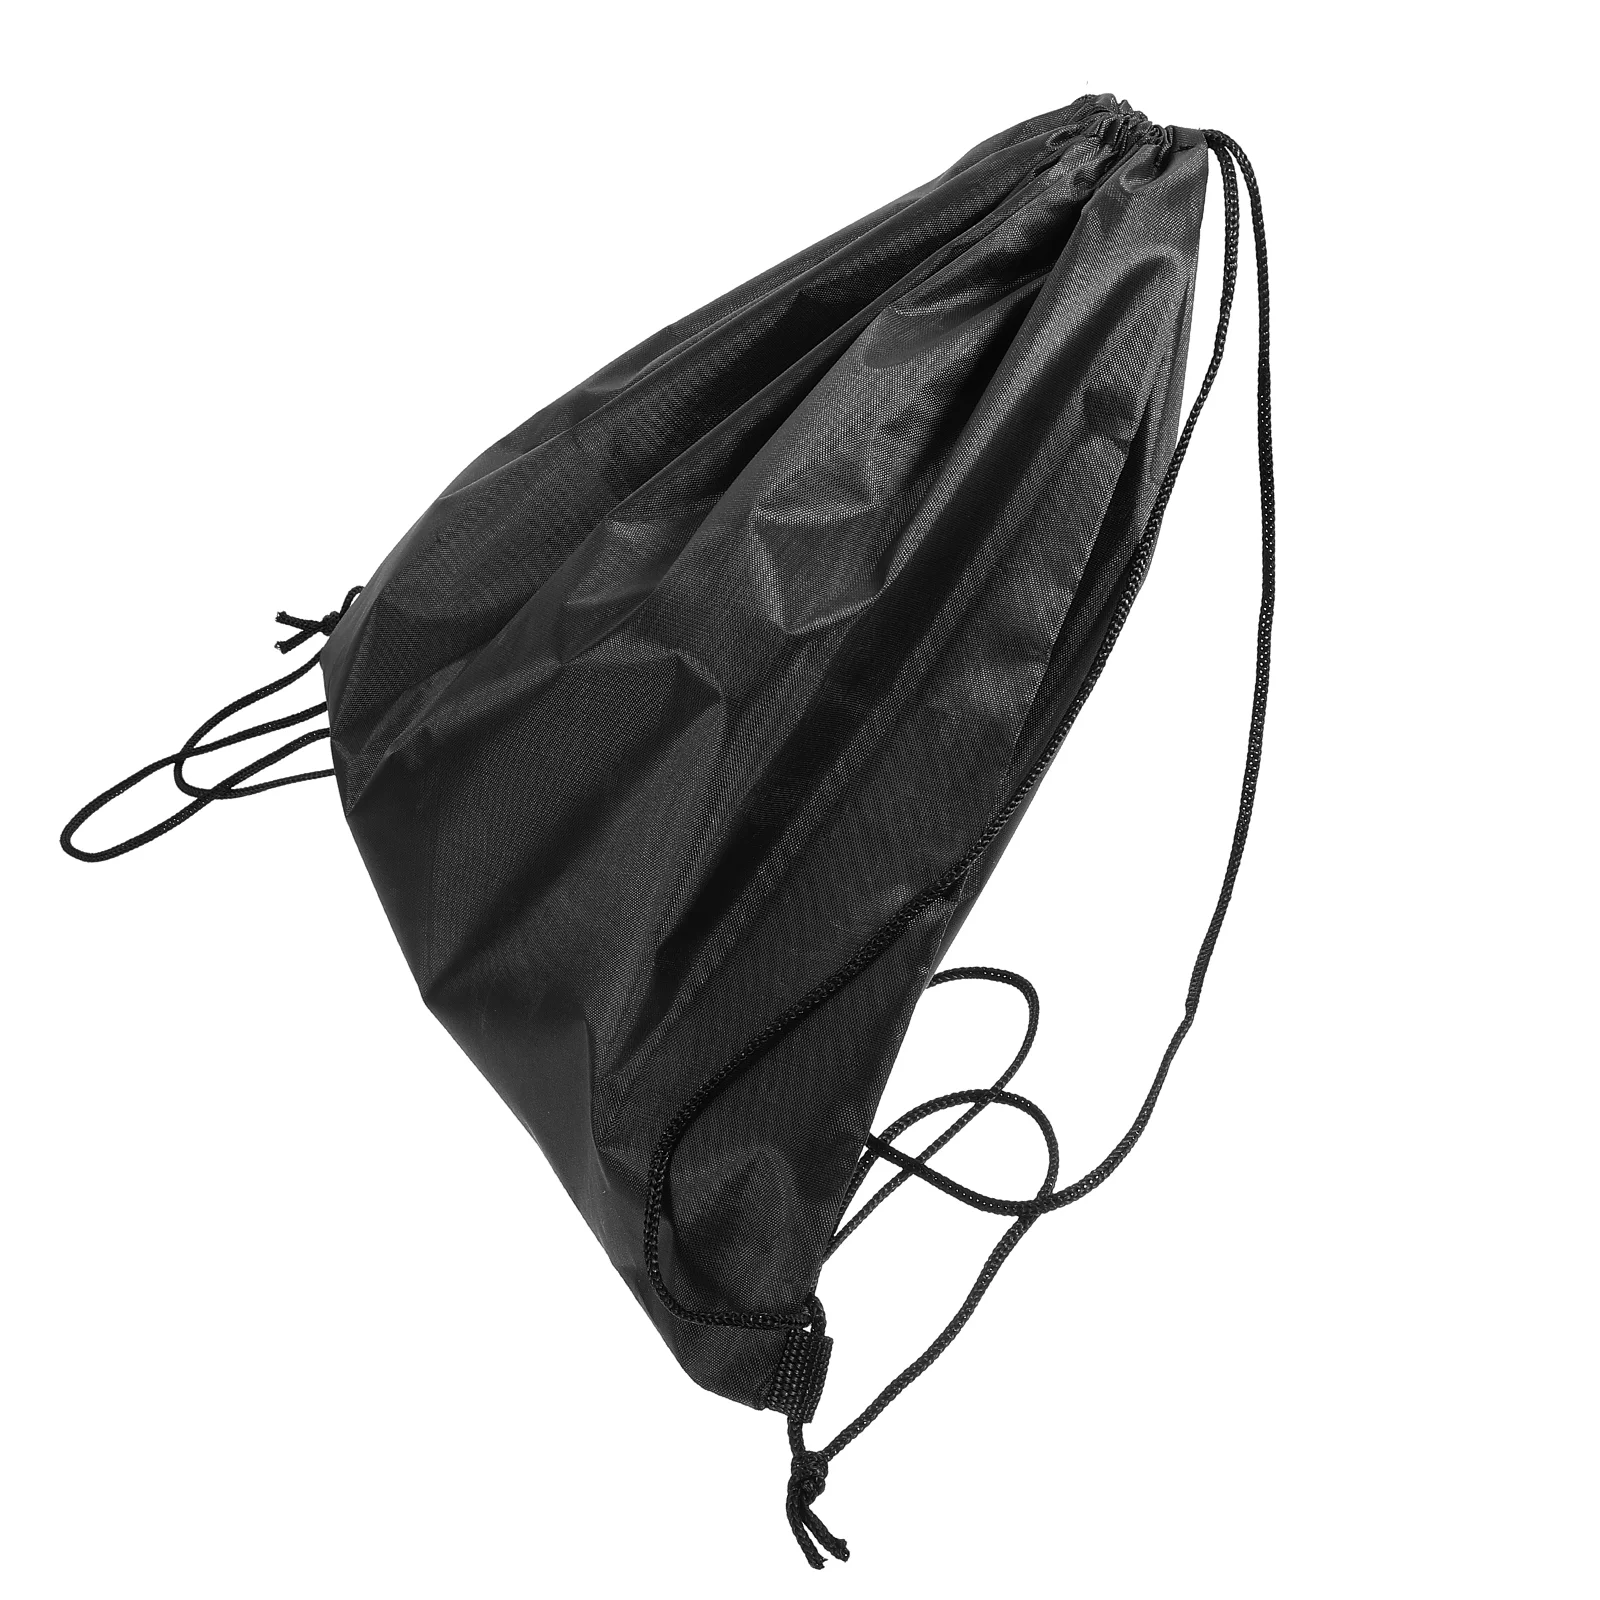 Portable Bag Drawstring Pouch Outdoor Motorcycle Storage Bag 4 colors waterproof bag swimming bag for camping hiking with hook zipper storage bag organizer bag outdoor portable pocket pouch